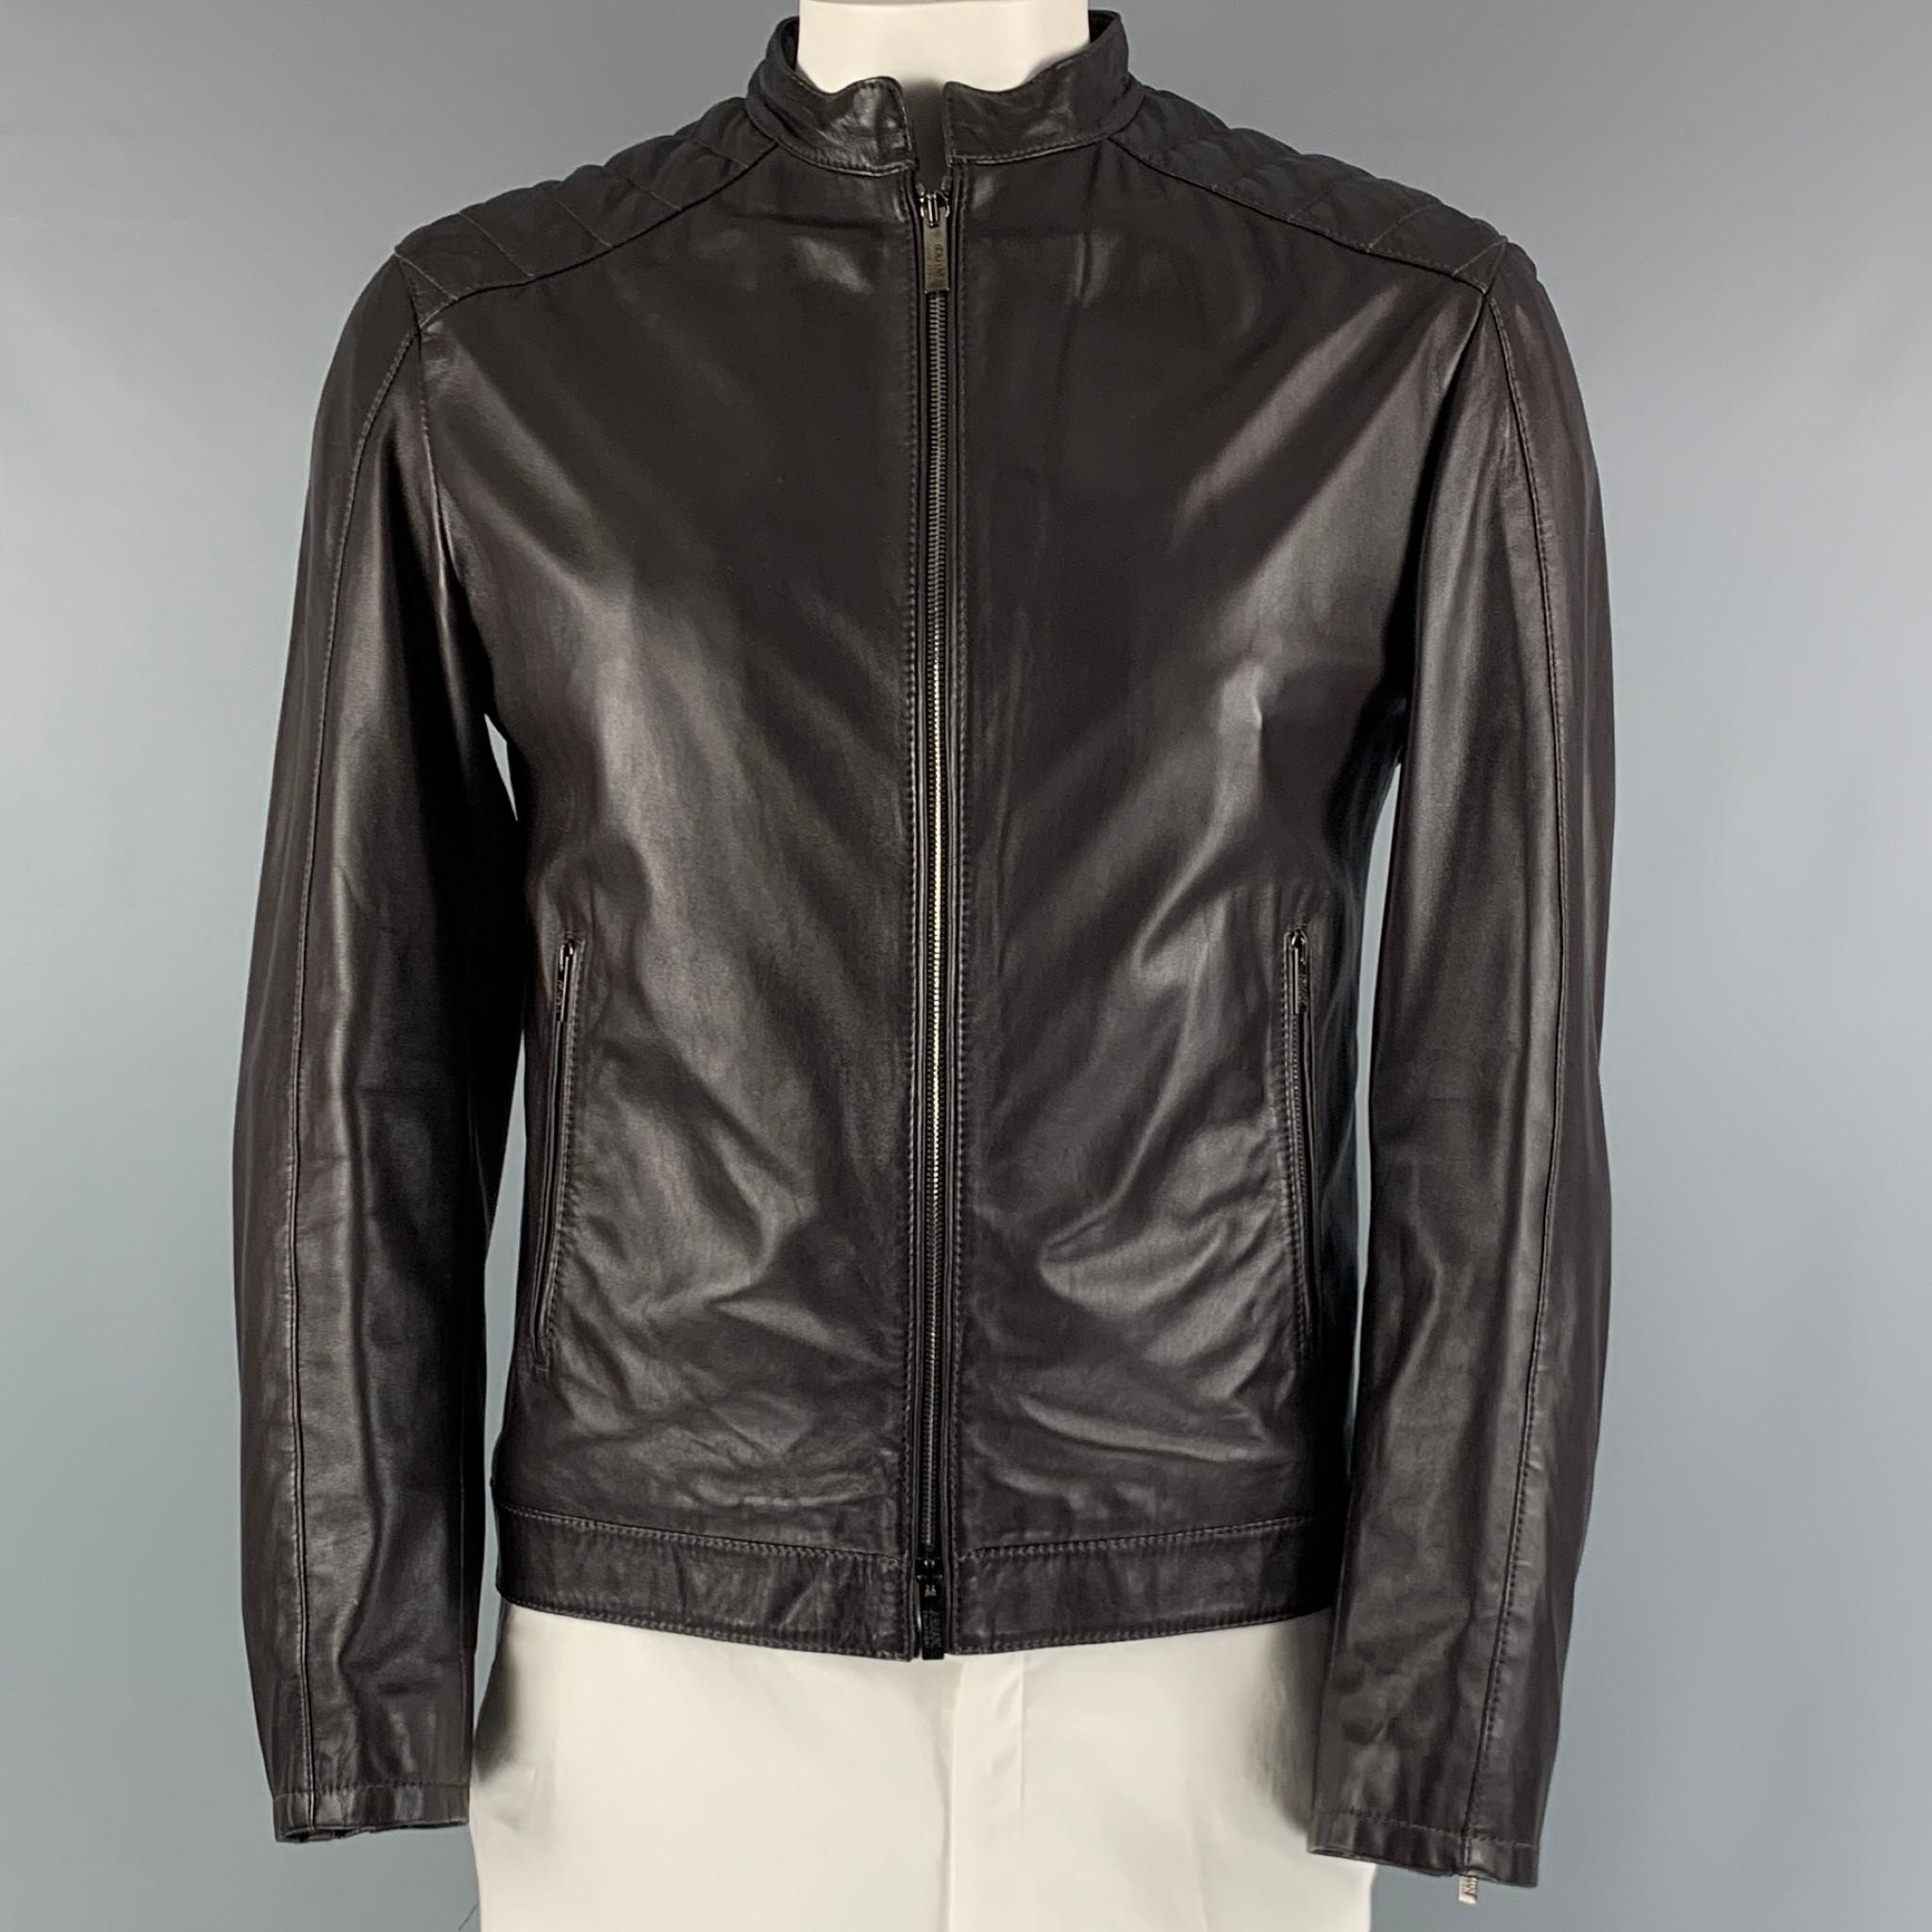 ARMANI COLLEZIONI motorcycle jacket comes in a brown leather material featuring a quilted texture at shoulder, mandarin collar, zip cuffs, zip pockets, and a zip up closure.

Excellent Pre-Owned Condition.
Marked: 42

Measurements:

Shoulder: 19